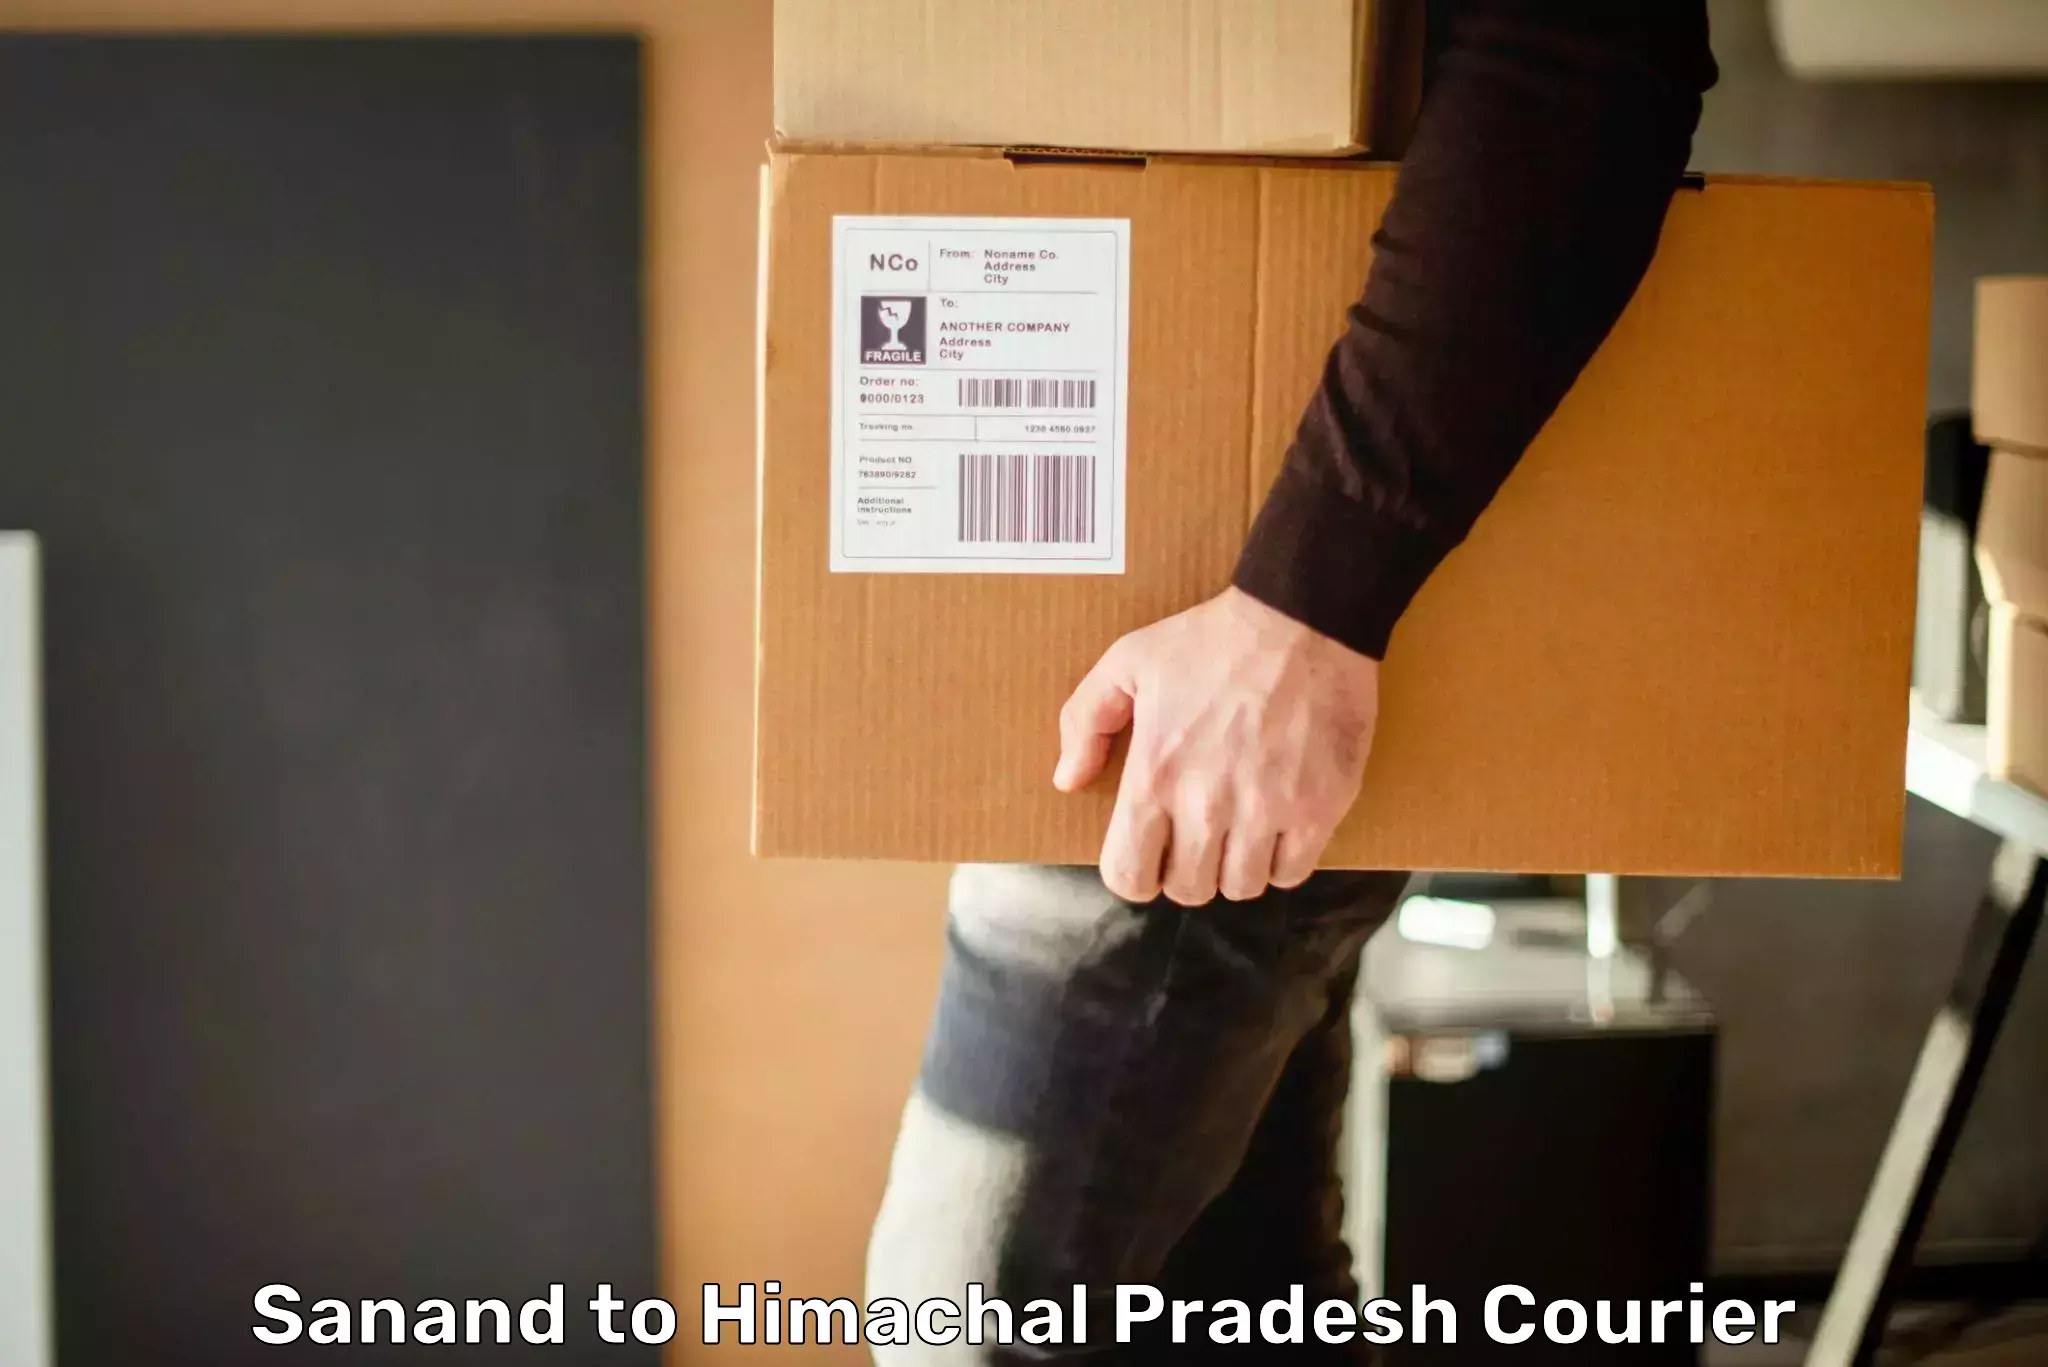 Express delivery capabilities Sanand to Himachal Pradesh